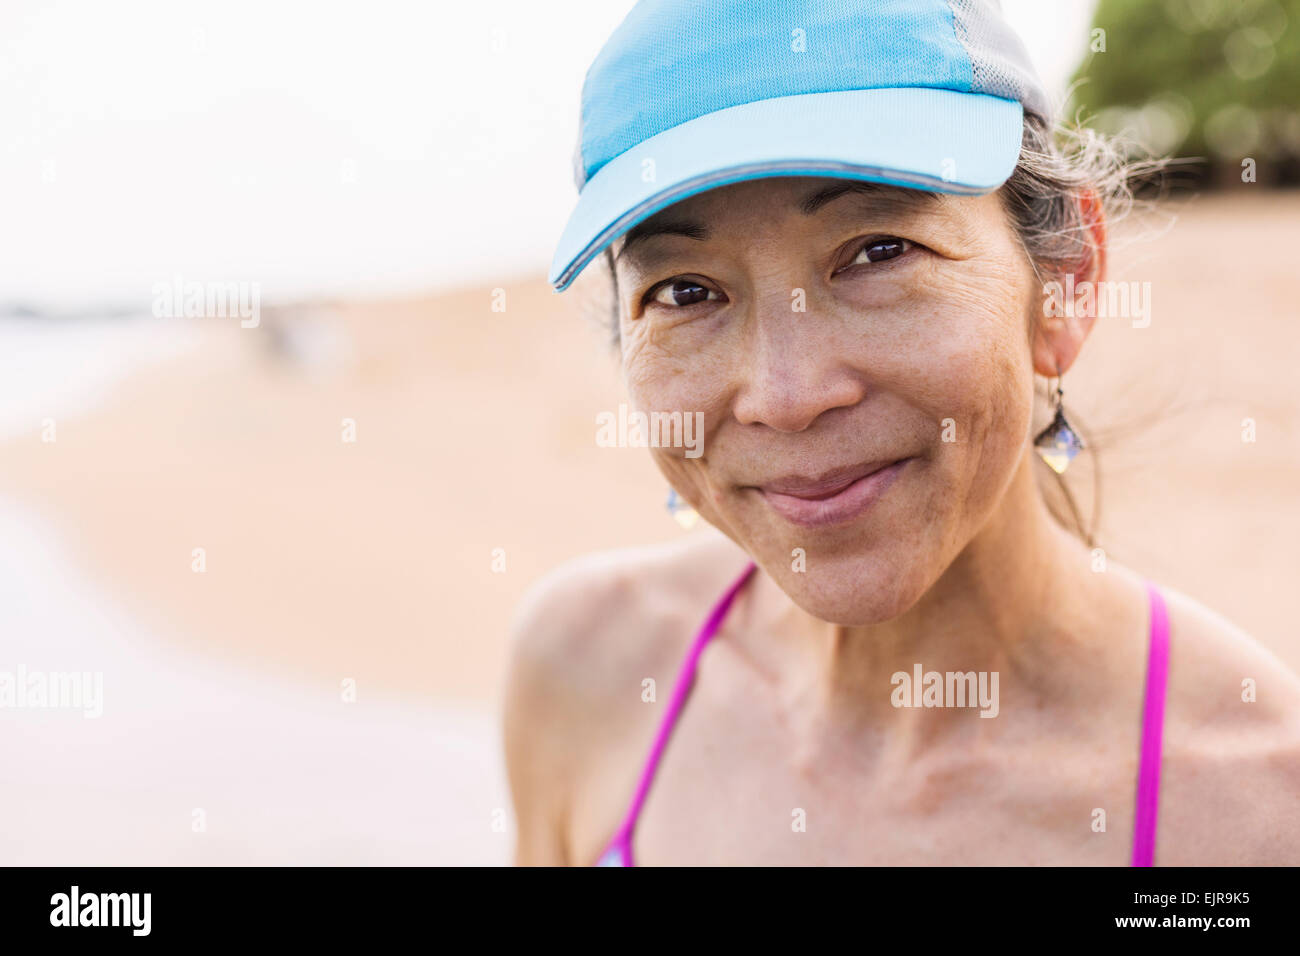 Japanese woman smiling on beach Banque D'Images